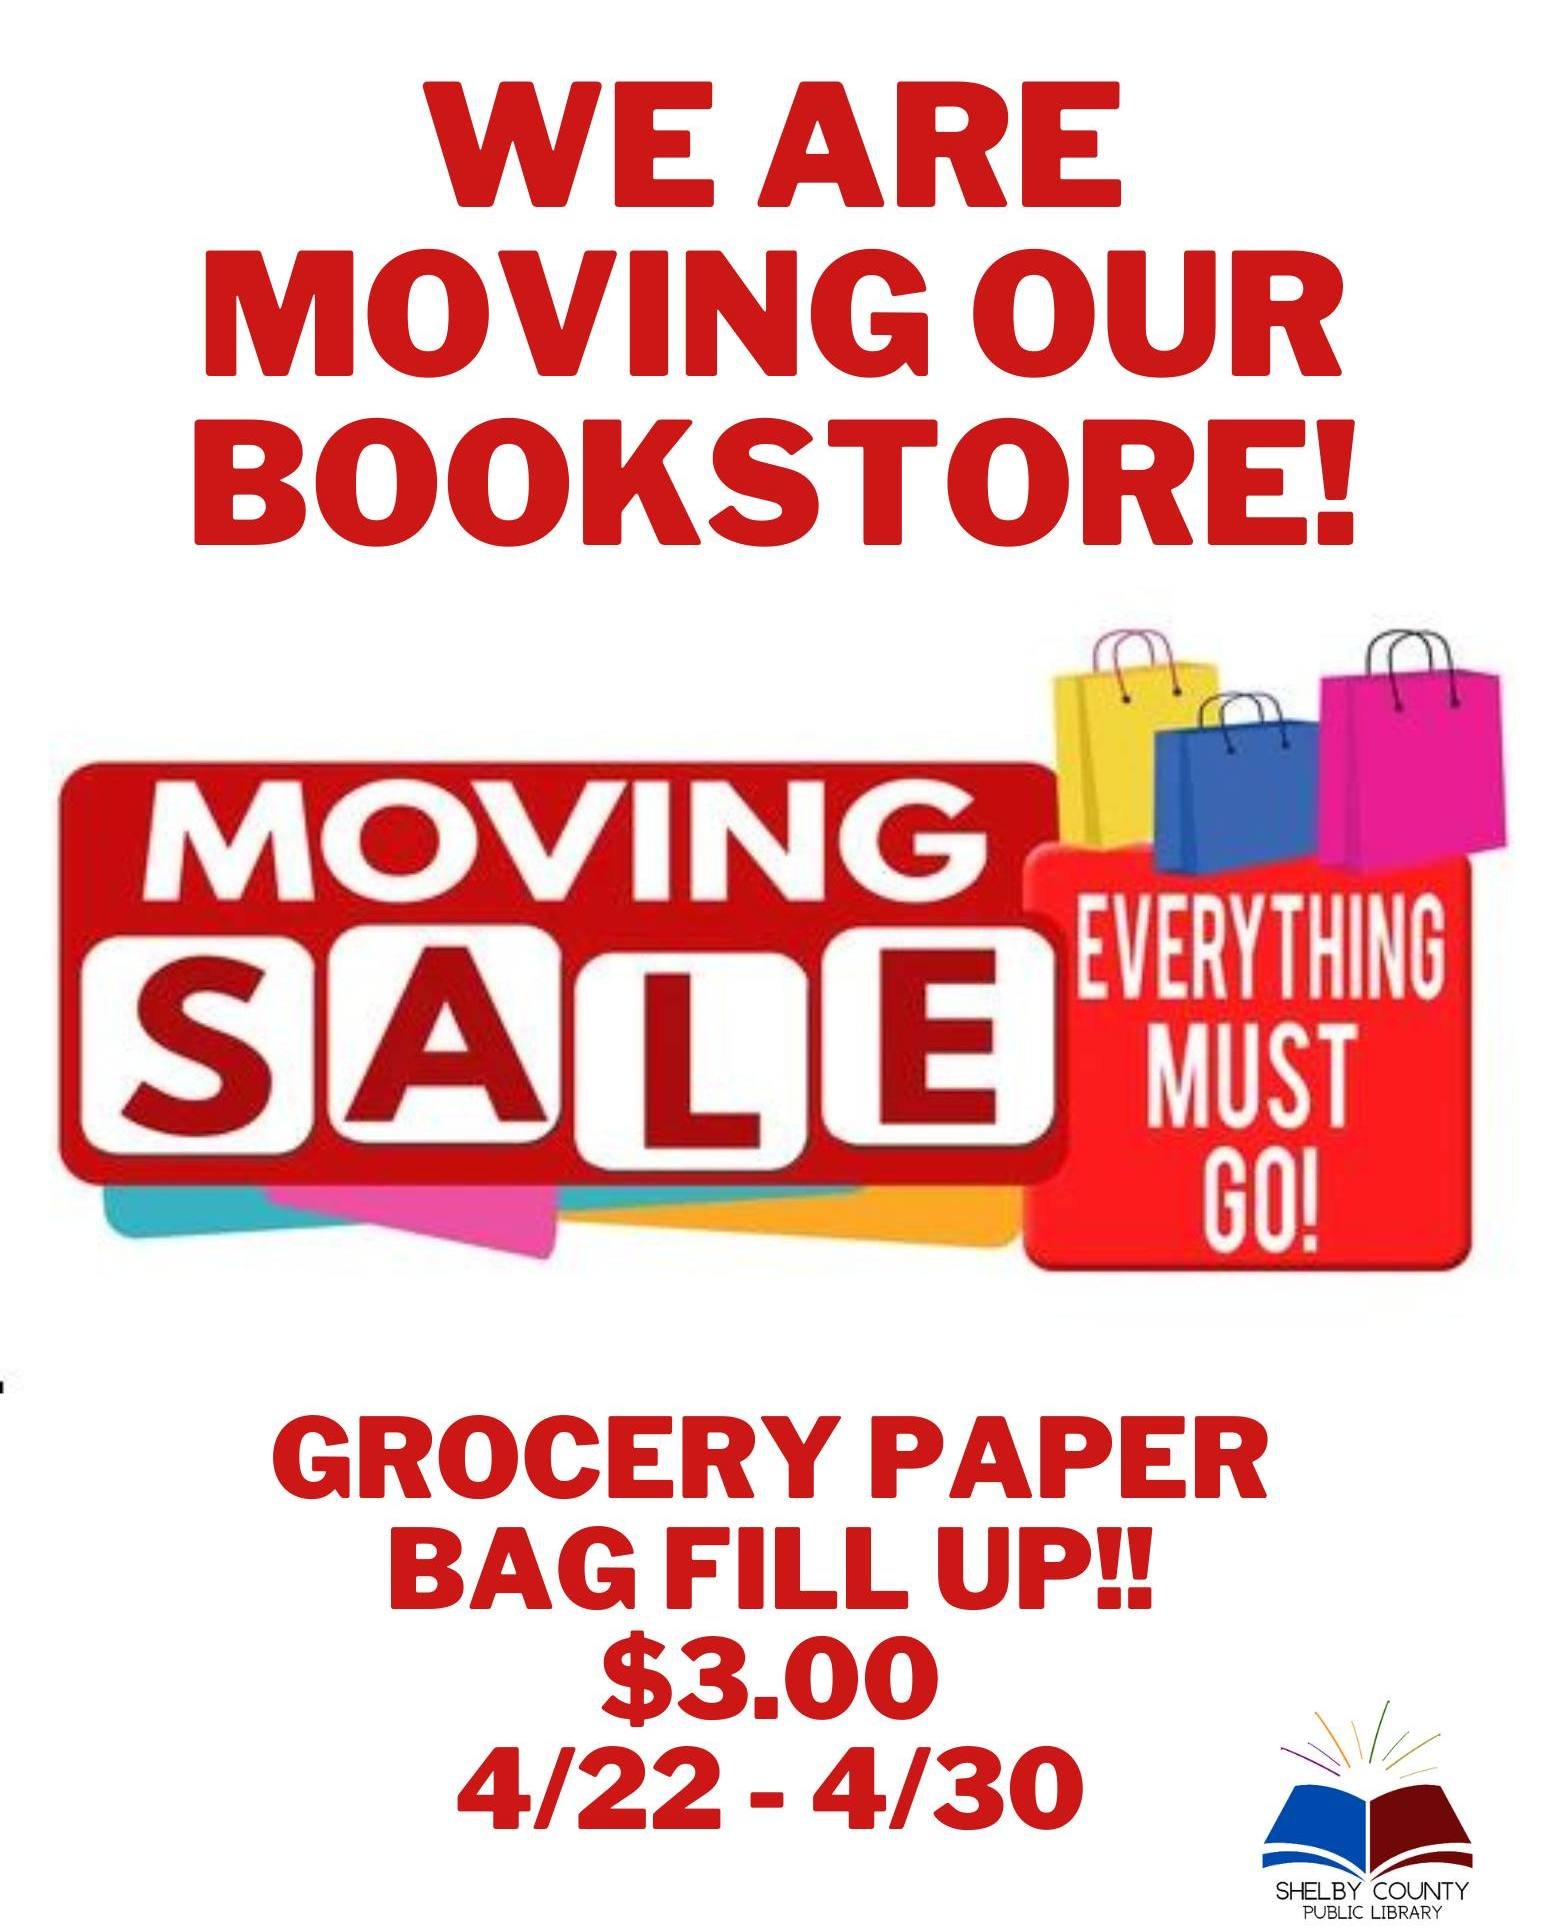 We are moving the bookstore and we need your help! We are selling paper bags for 3 dollars and whatever you can fit in that bag is yours! So whether you are on the hunt for a new read or just want to find the weirdest most random book you've ever see